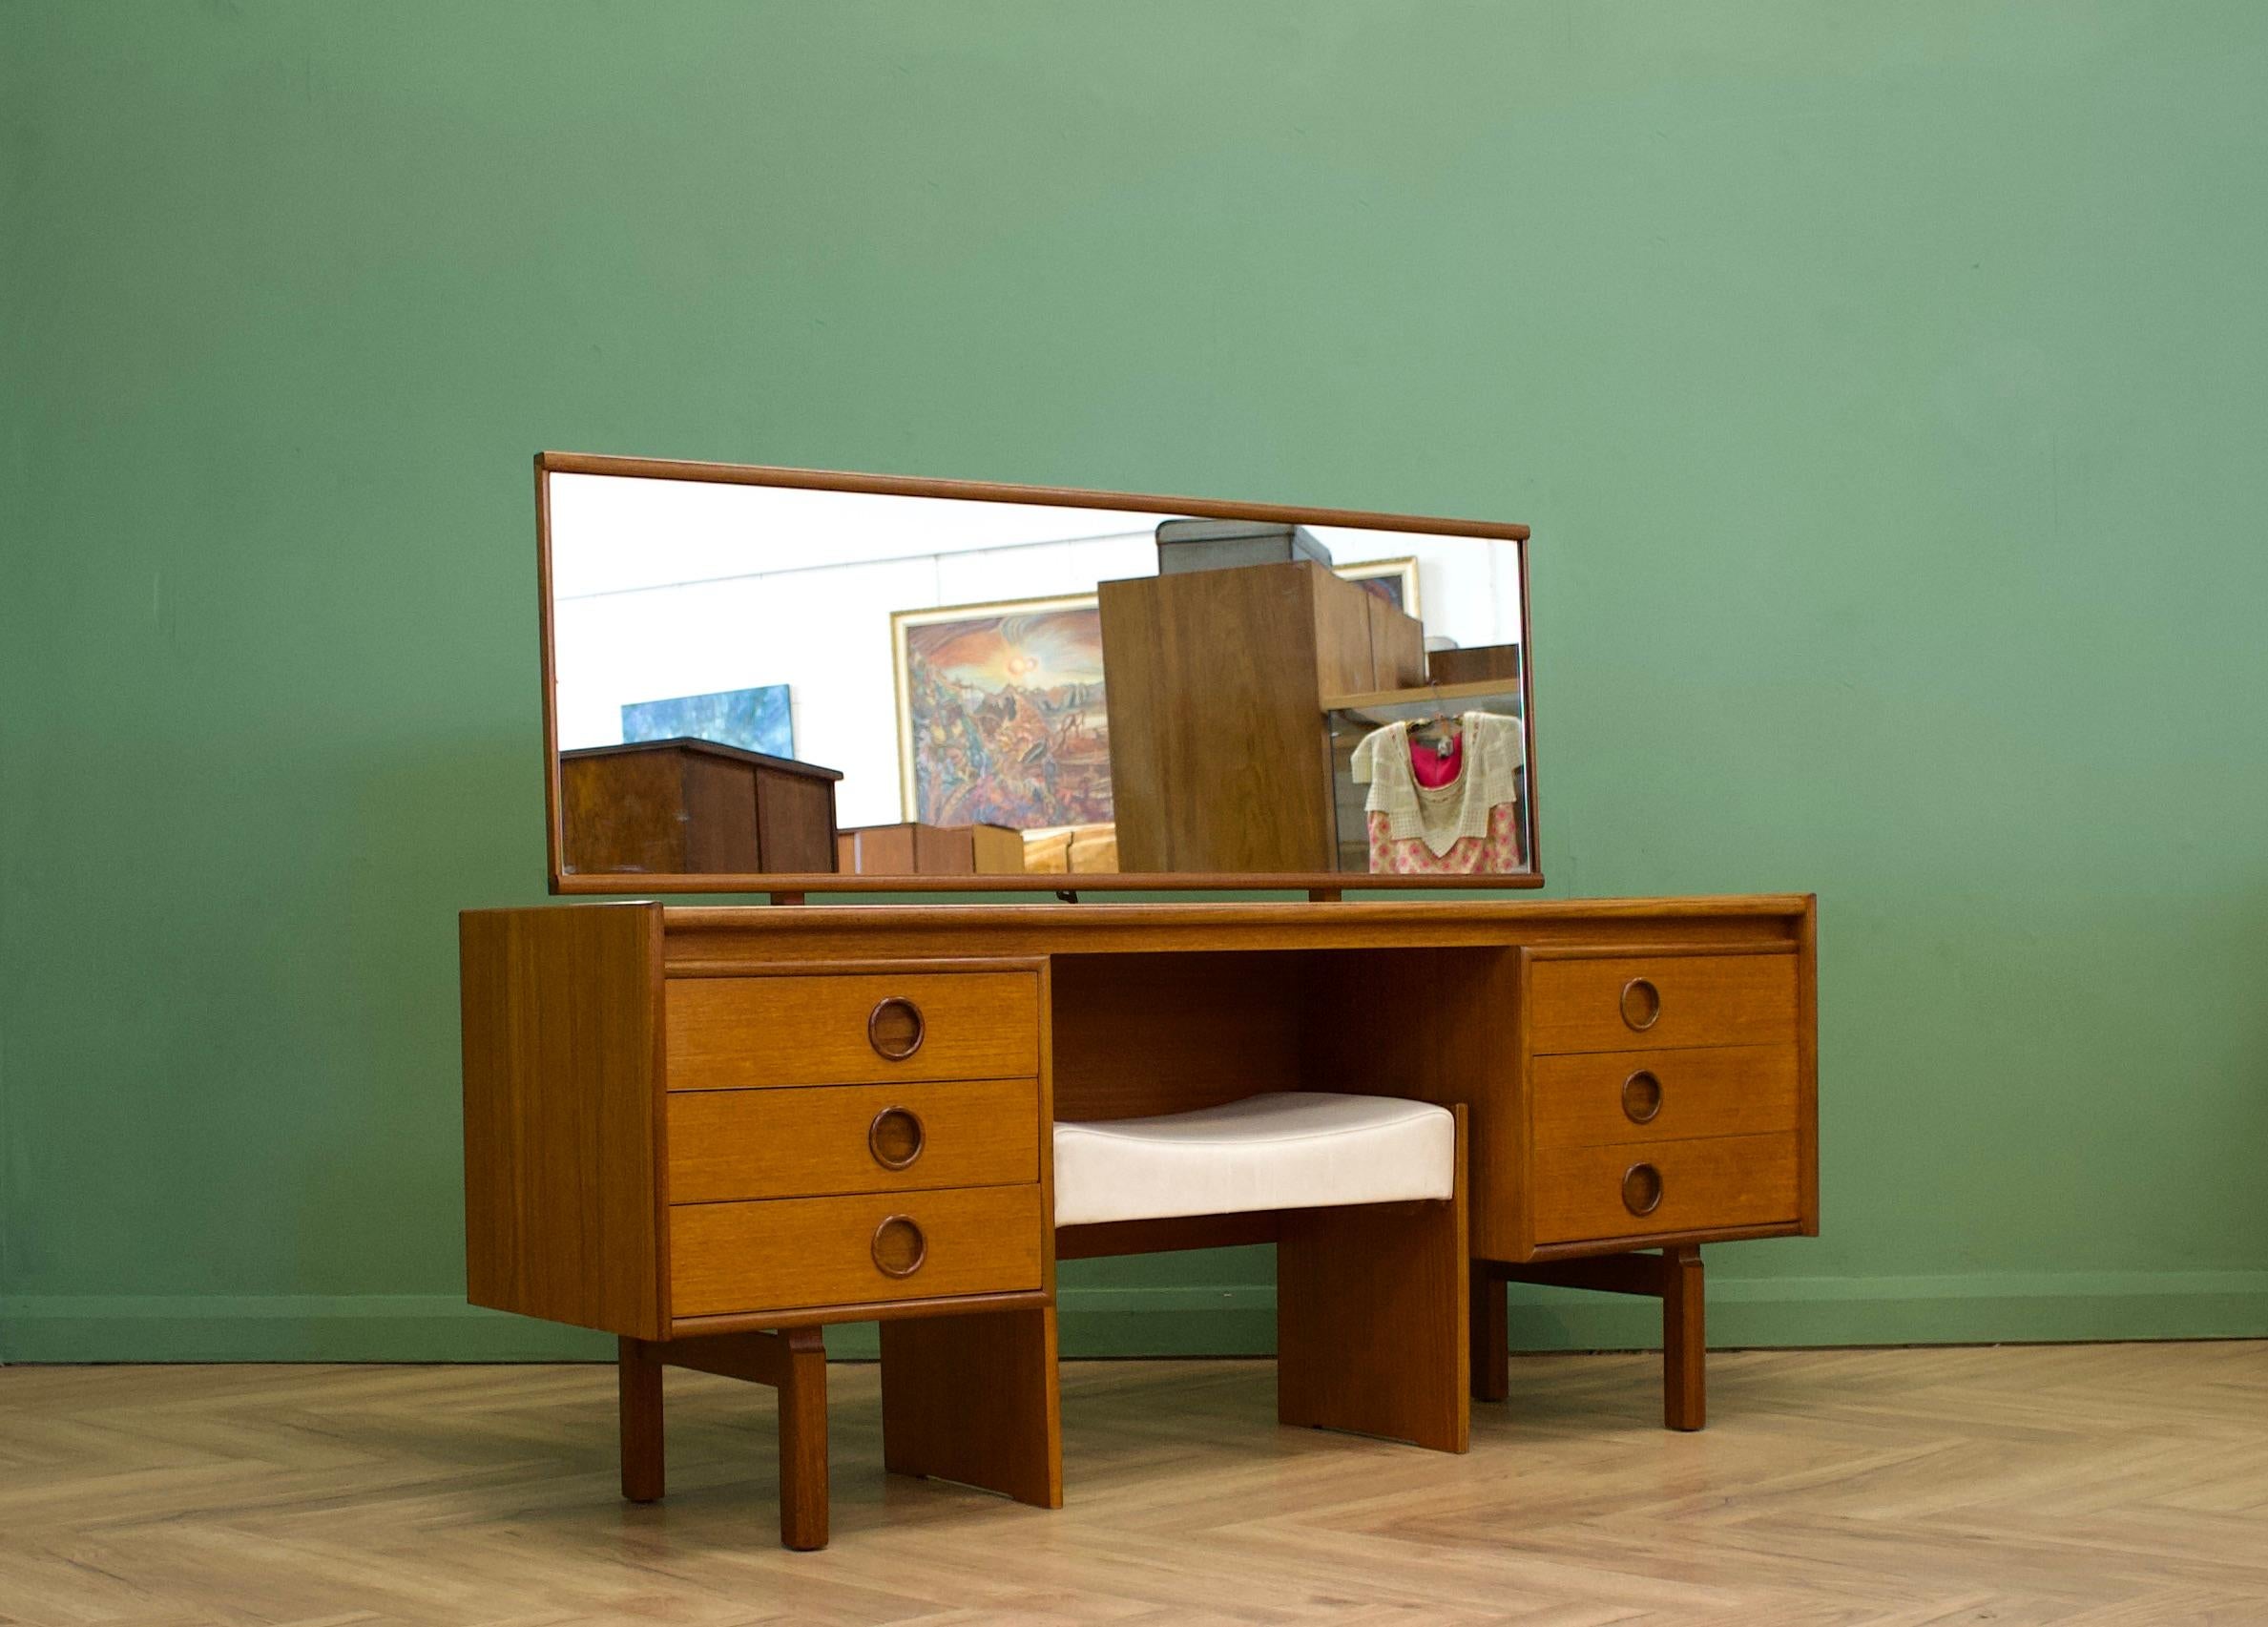 A mid century teak dressing table from Bath Cabinet Makers - a high quality furniture maker - circa 1960's
Complete with a large mirror
There are six drawers in total - each having a recessed, solid teak, round handle
The piece stands on solid teak